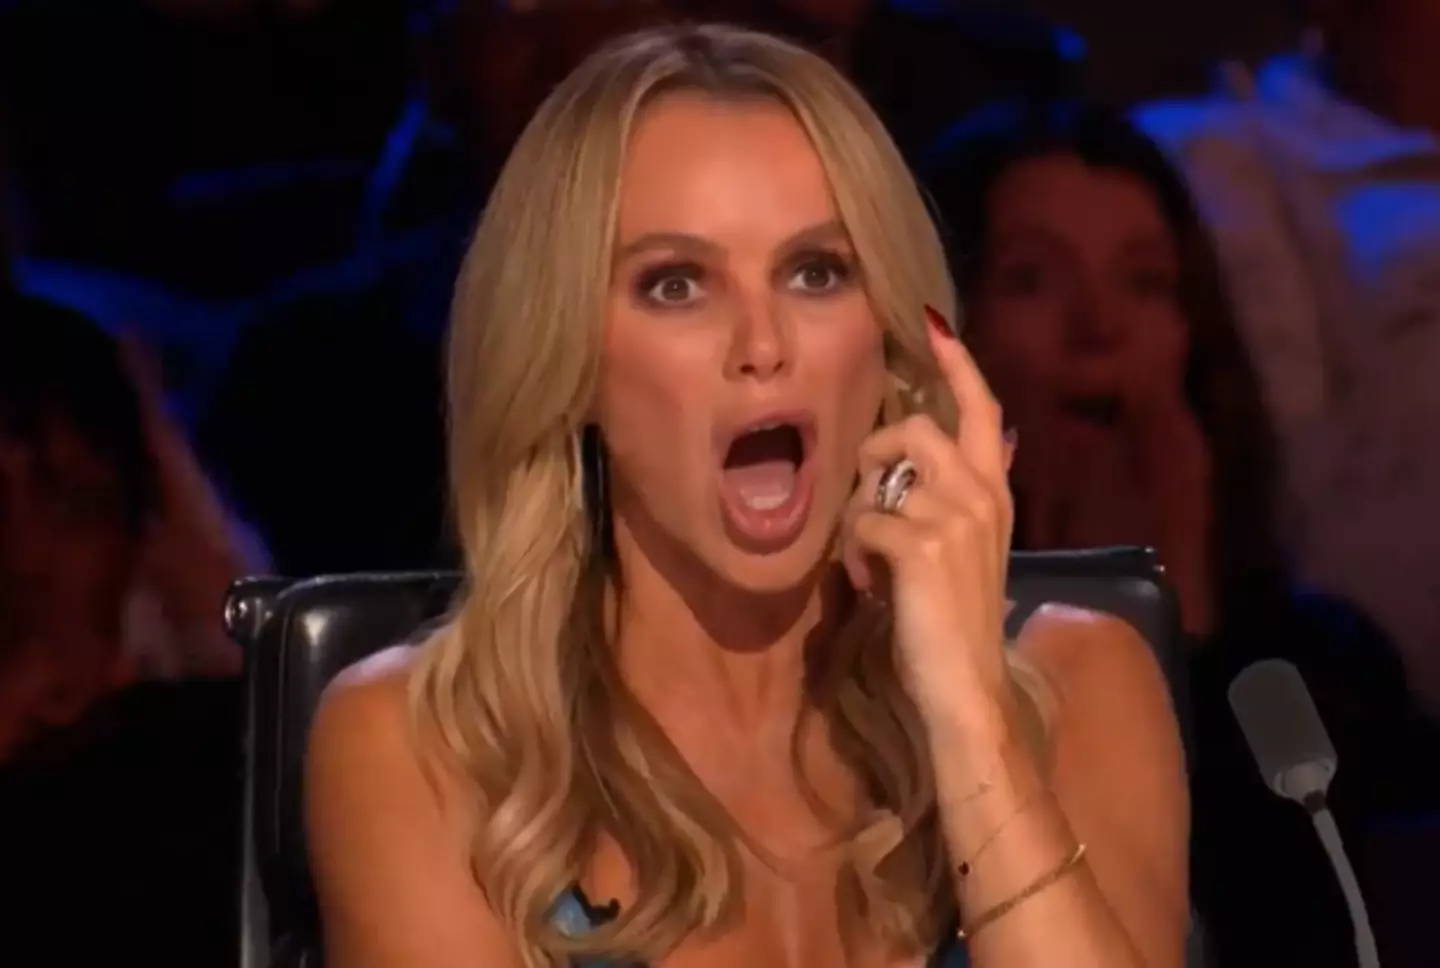 Amanda Holden screamed 'oh my God' as an act's stunt on Britain’s Got Talent almost went seriously wrong. (ITV)